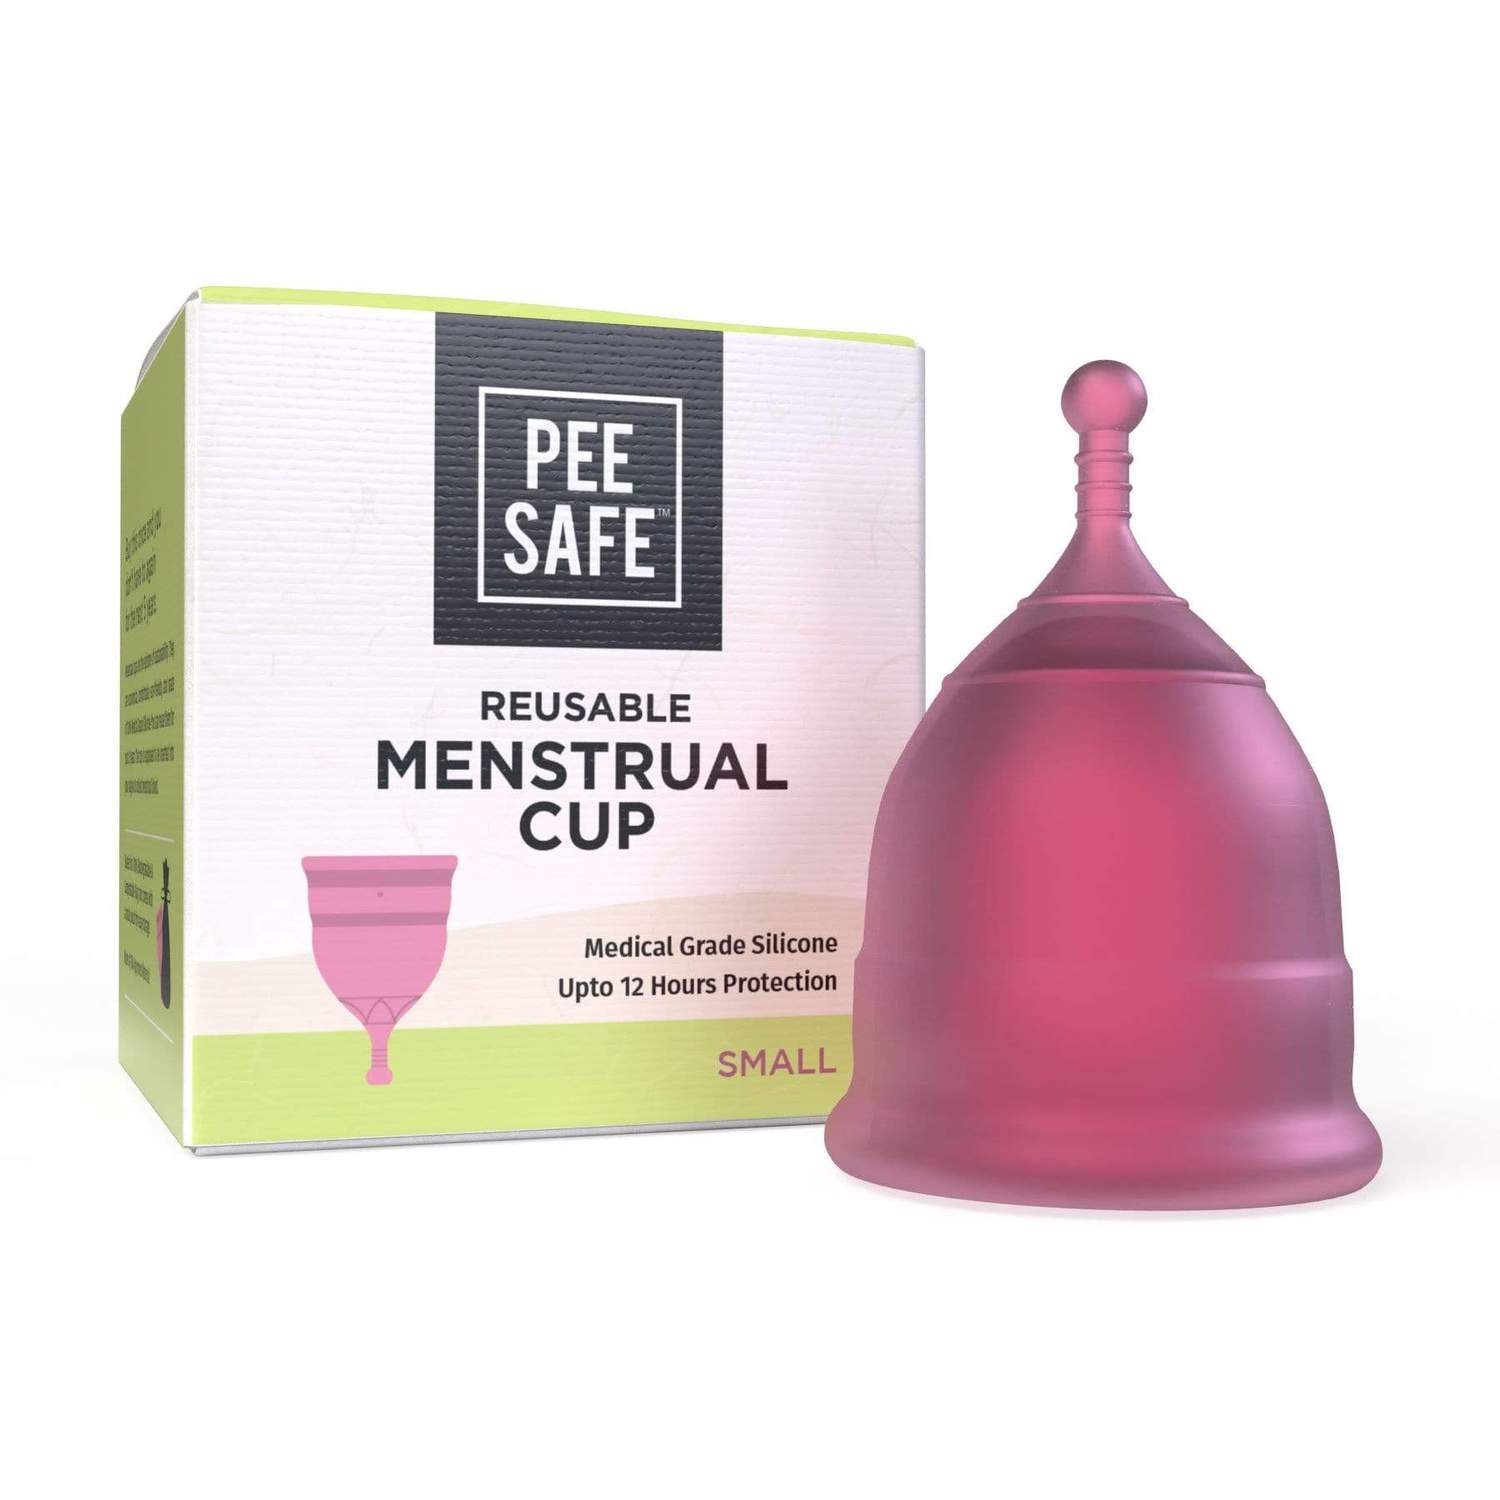 Pee Safe Reusable Menstrual Cup With Medical Grade Silcone For Women - Small 